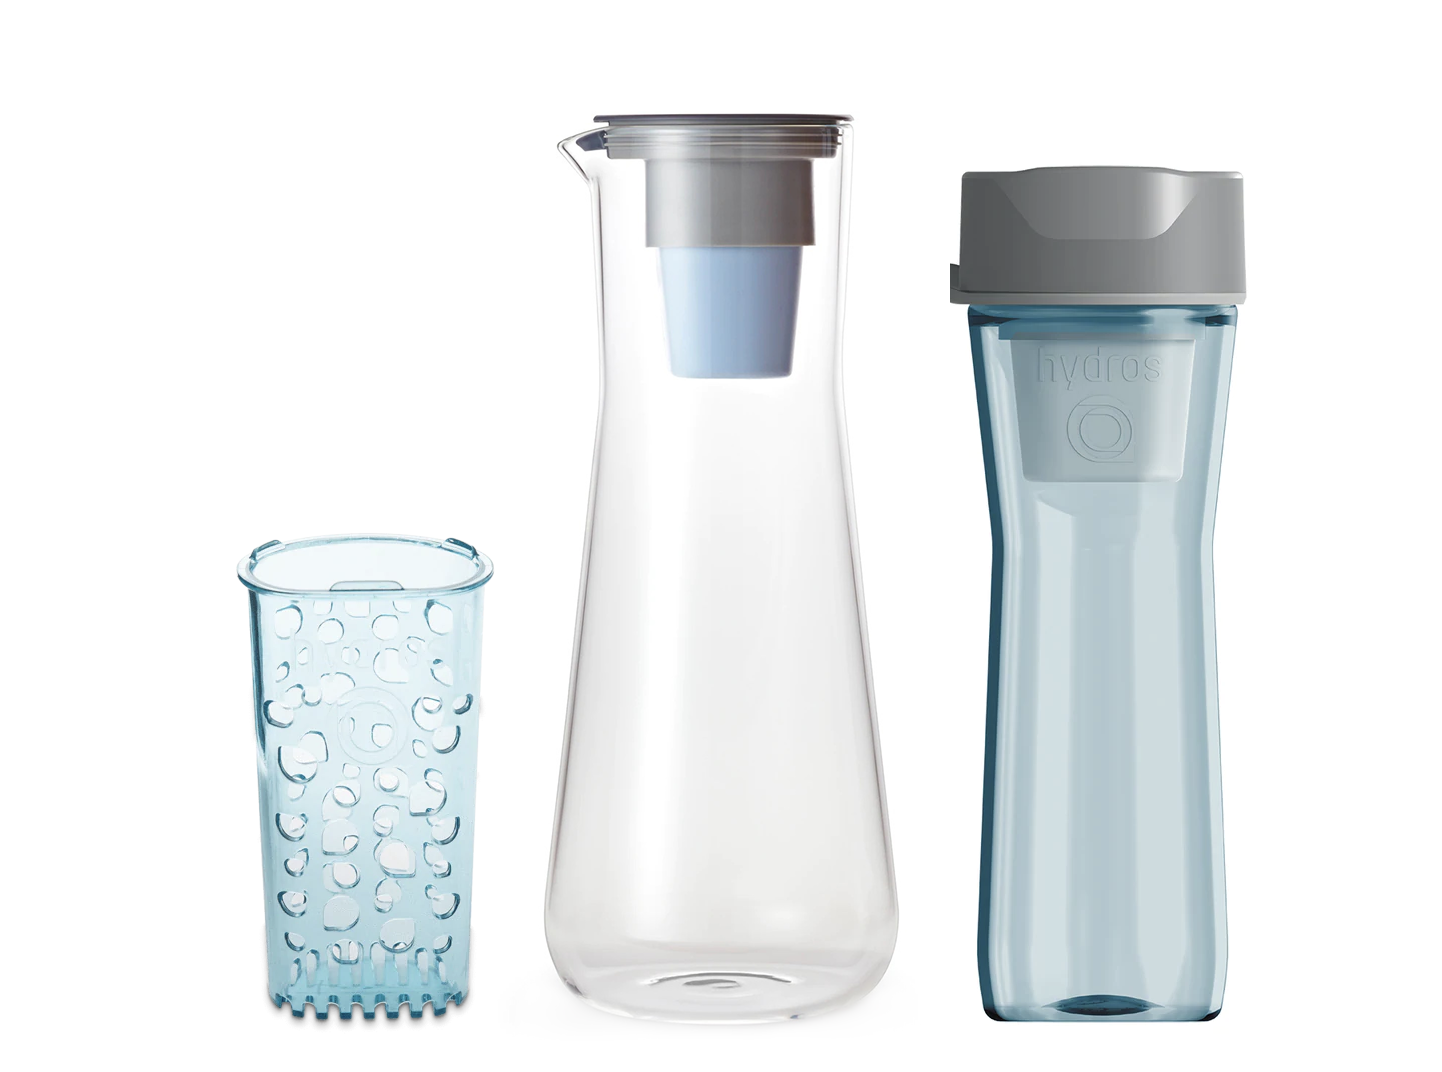 Brita's Filtered Water Bottle Is the Best for Summer